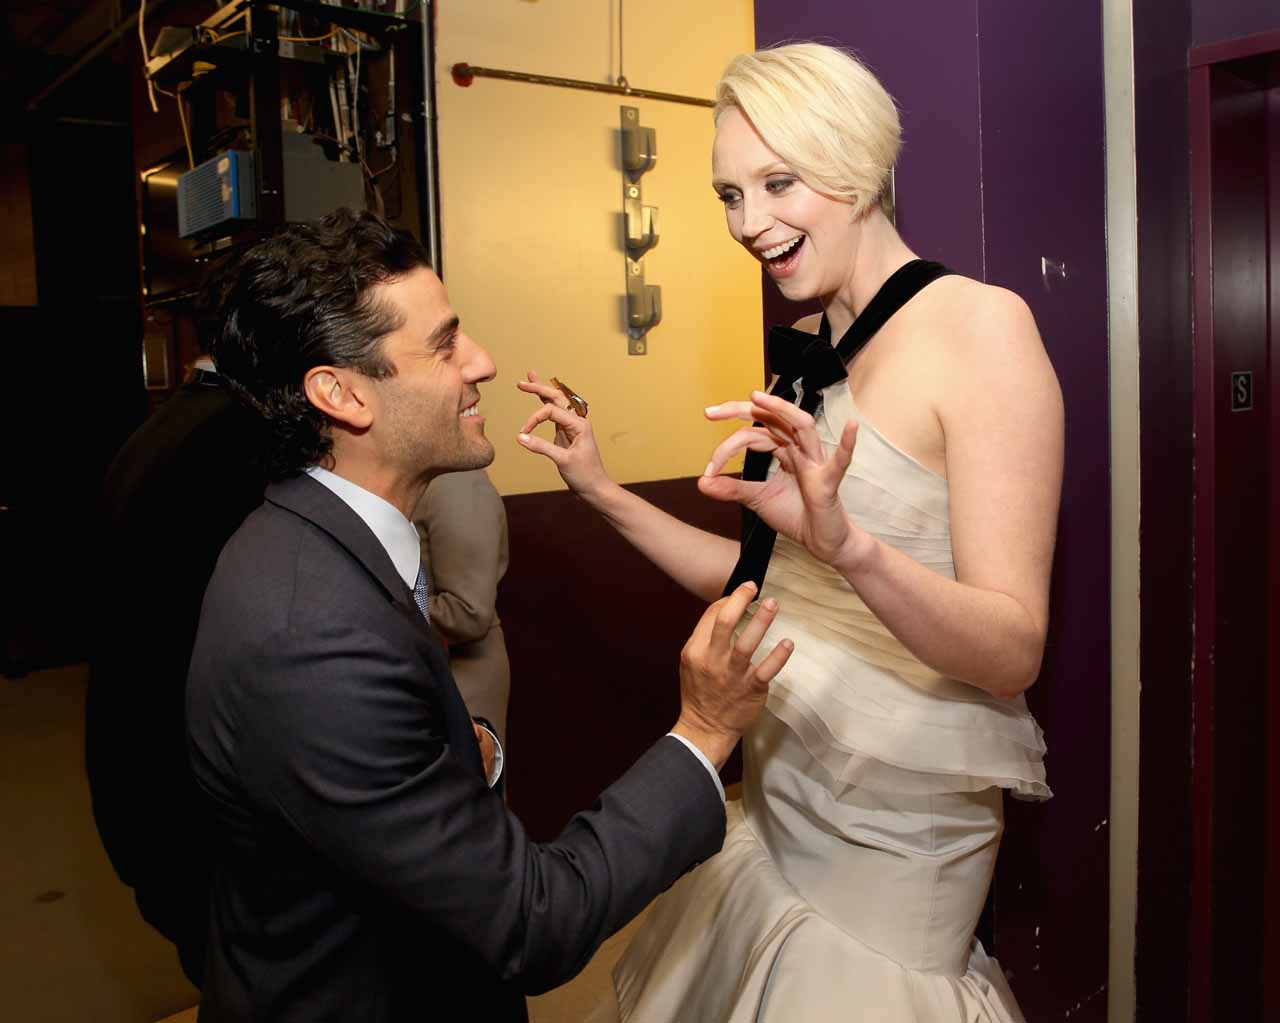 HOLLYWOOD, CA - DECEMBER 14:  Actors Oscar Isaac (L) and Gwendoline Christie attend the World Premiere of ?Star Wars: The Force Awakens? at the Dolby, El Capitan, and TCL Theatres on December 14, 2015 in Hollywood, California.  (Photo by Jesse Grant/Getty Images for Disney) *** Local Caption *** Oscar Isaac;Gwendoline Christie